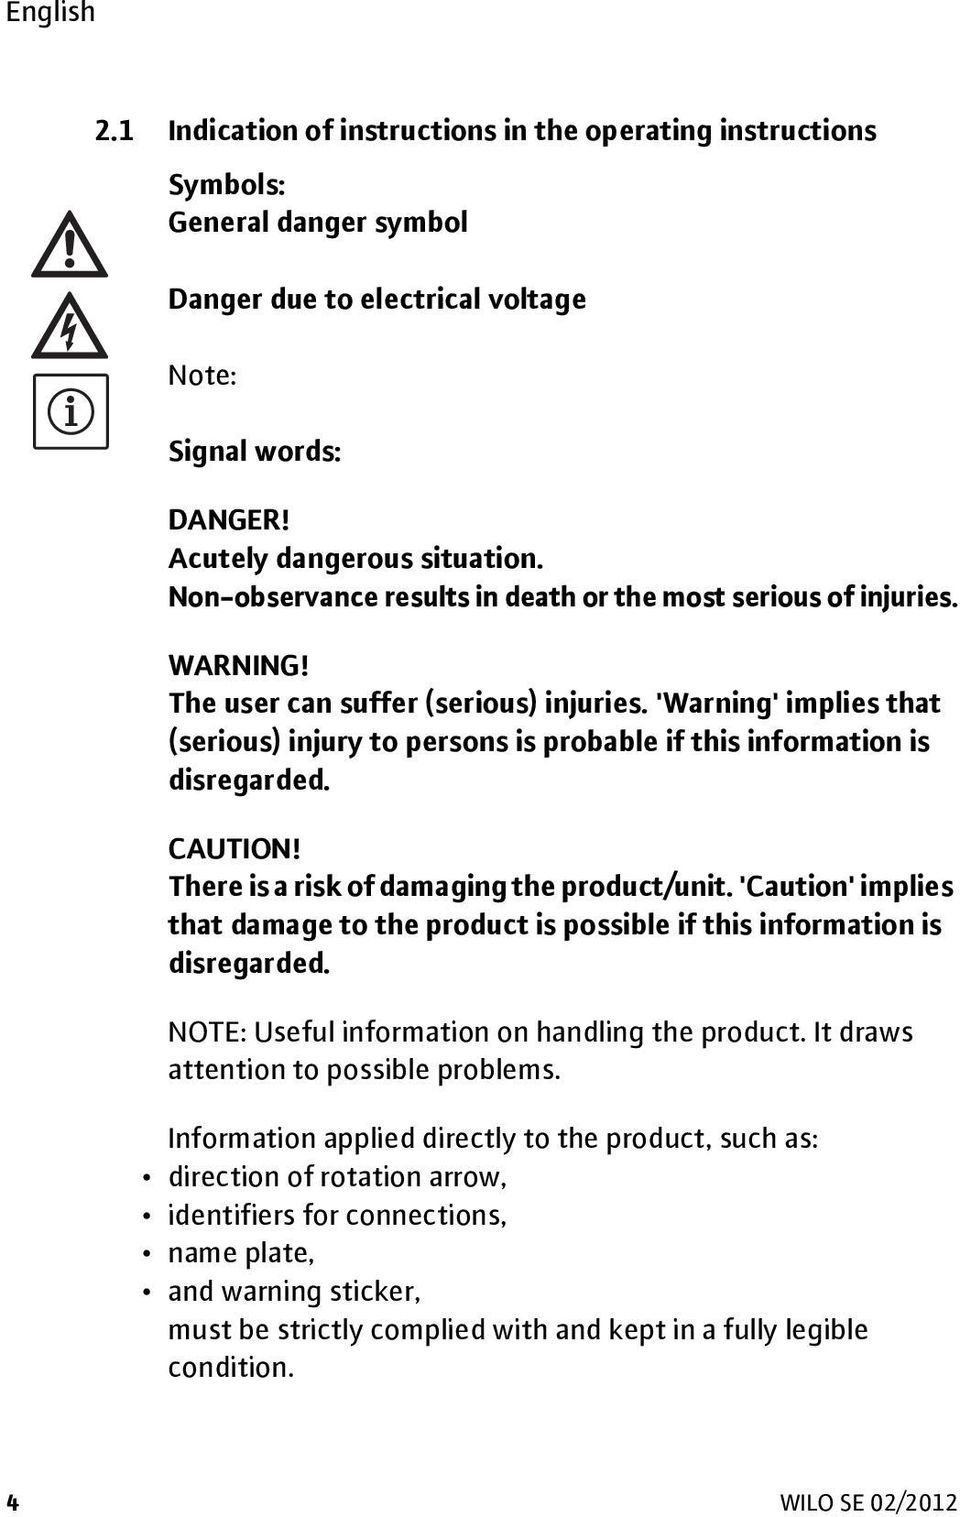 'Warning' implies that (serious) injury to persons is probable if this information is disregarded. CAUTION! There is a risk of damaging the product/unit.